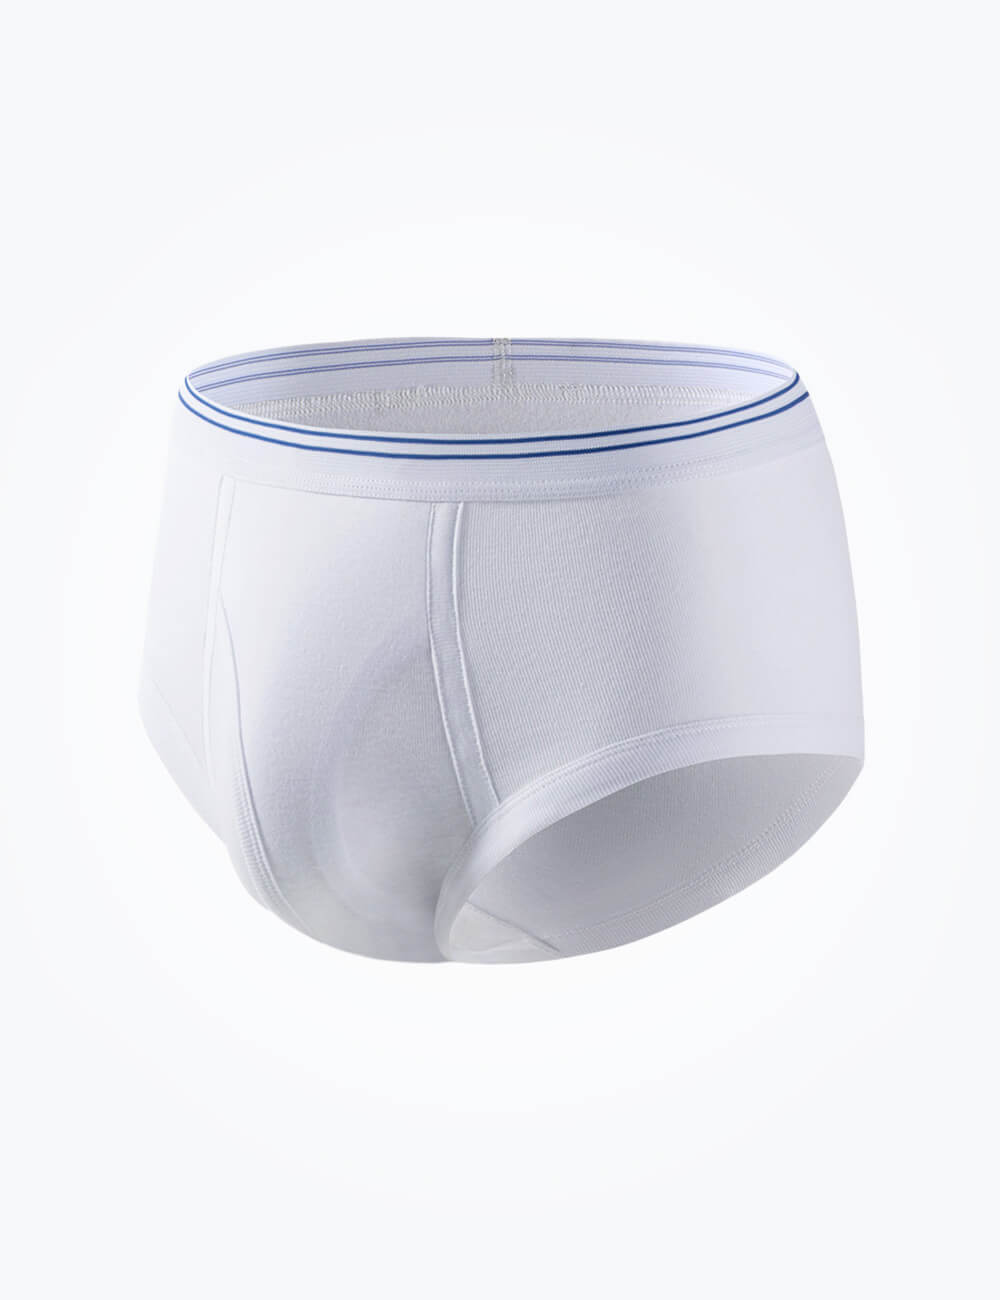  Mens Incontinence Underwear Washable Incontinence